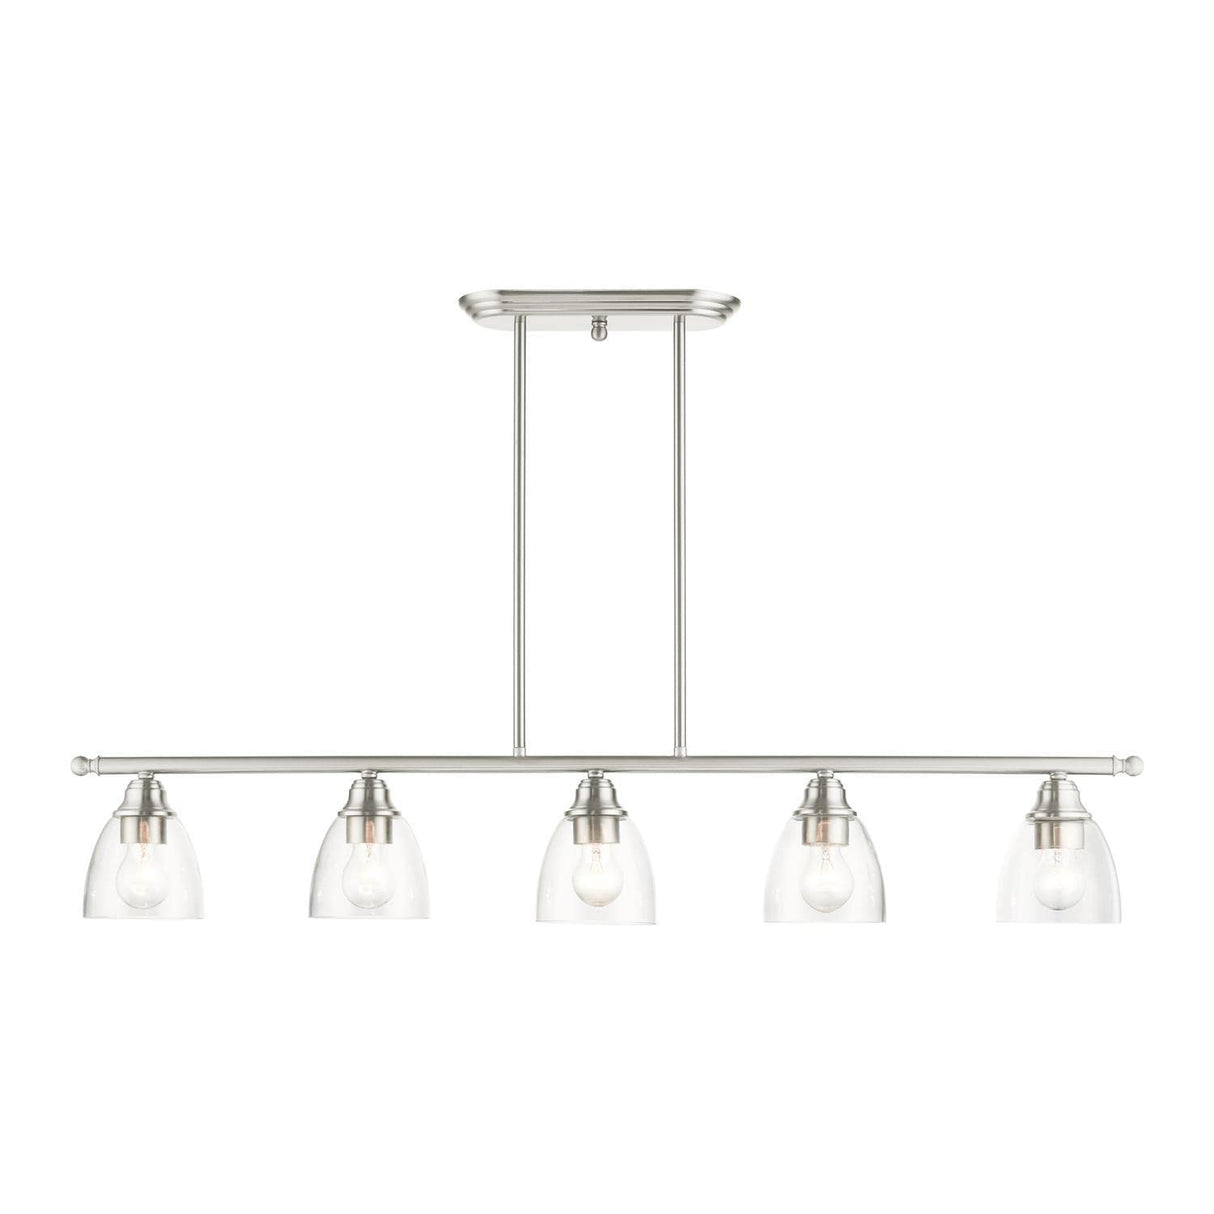 Montgomery Collection N/A Light Brushed Nickel Linear Chandelier (46338-91)